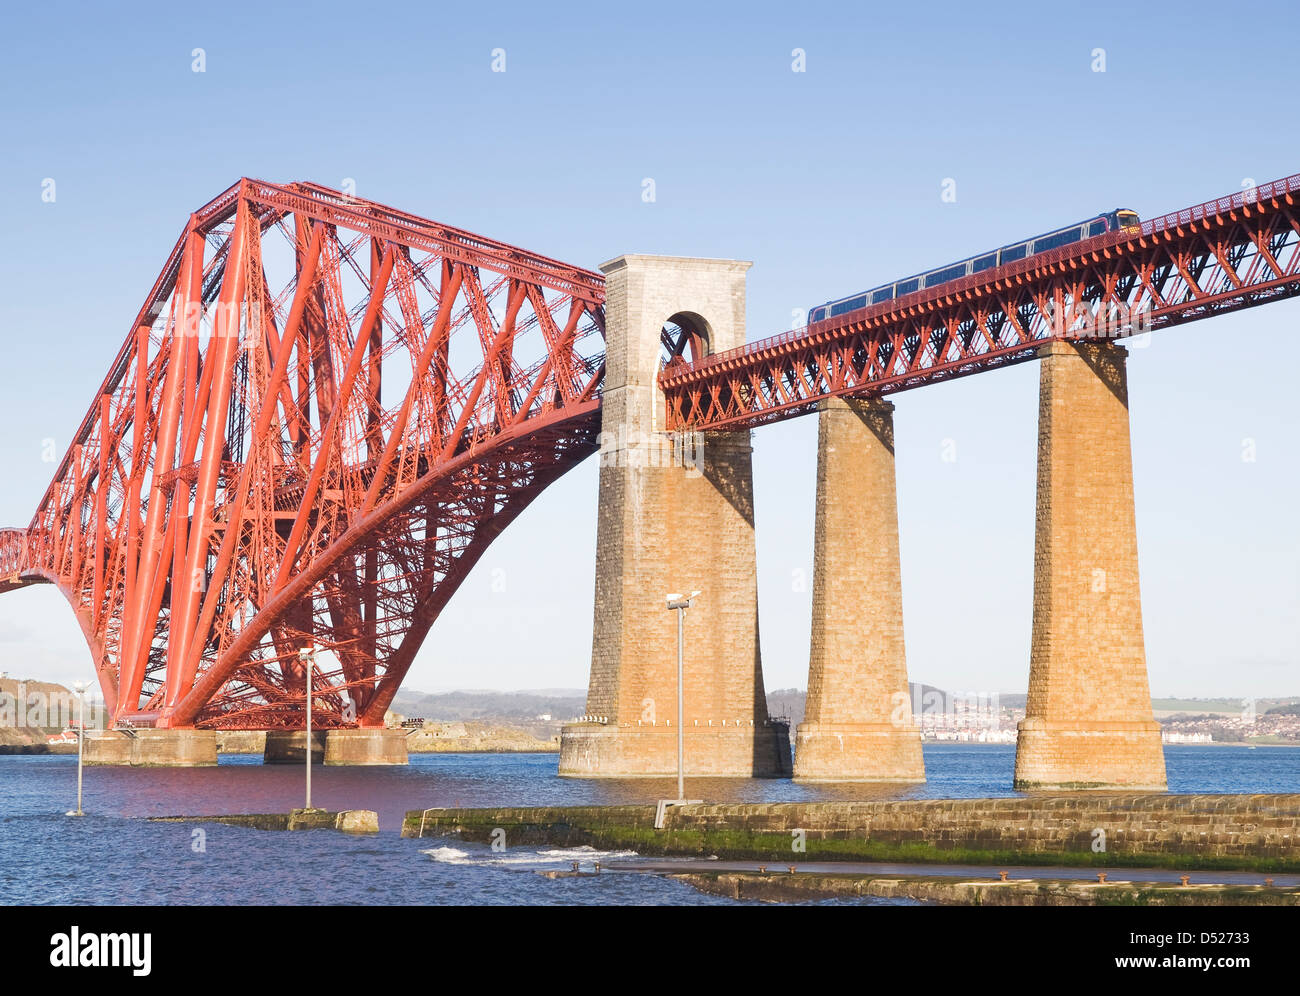 Forth Rail Bridge, Edinburgh, Scotland.This bridge connects the towns of North and South Queensferry. Stock Photo